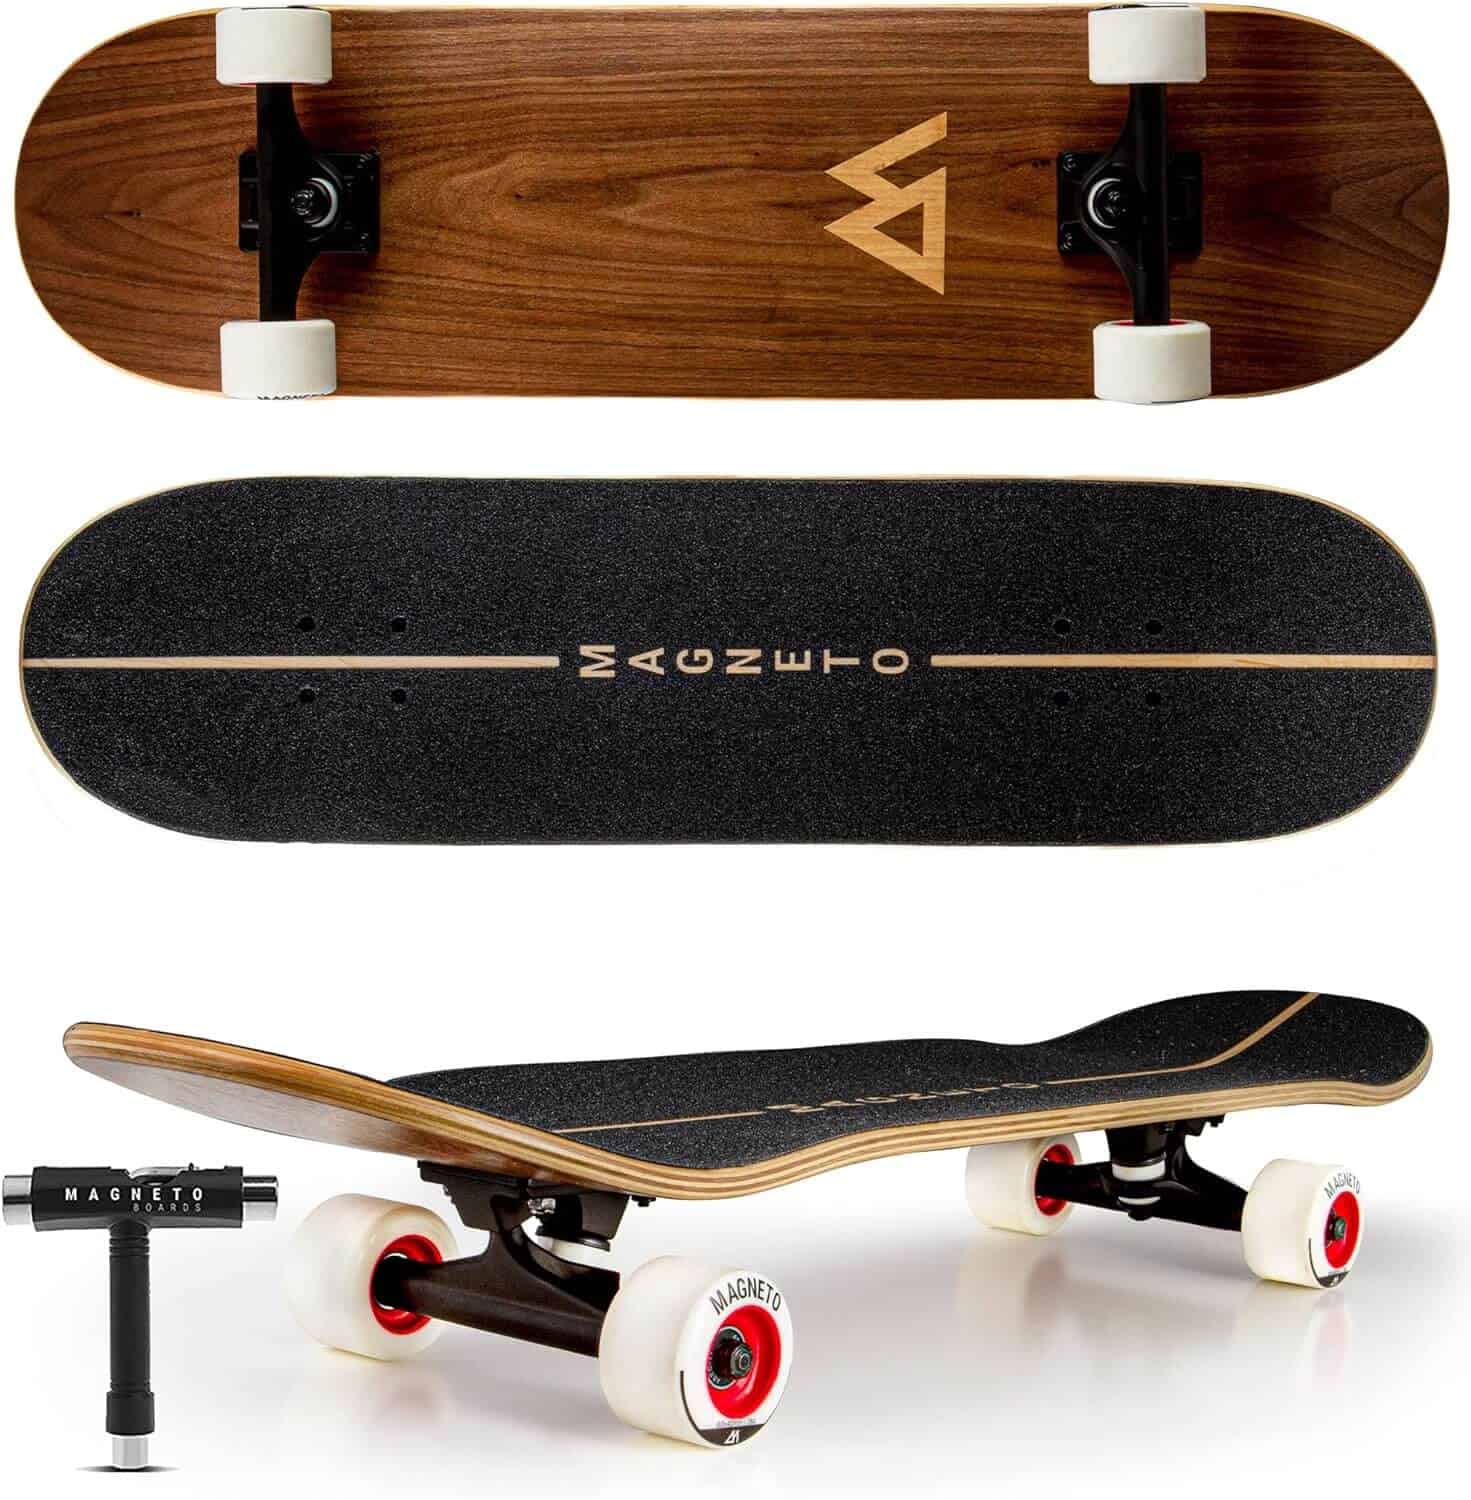 Best skateboard for beginners. The deck is 8.5” wide which makes it a nice stable ride. The weight limit for this board is 275 lb. The 140mm skate trucks are made from high quality gravity cast aluminum